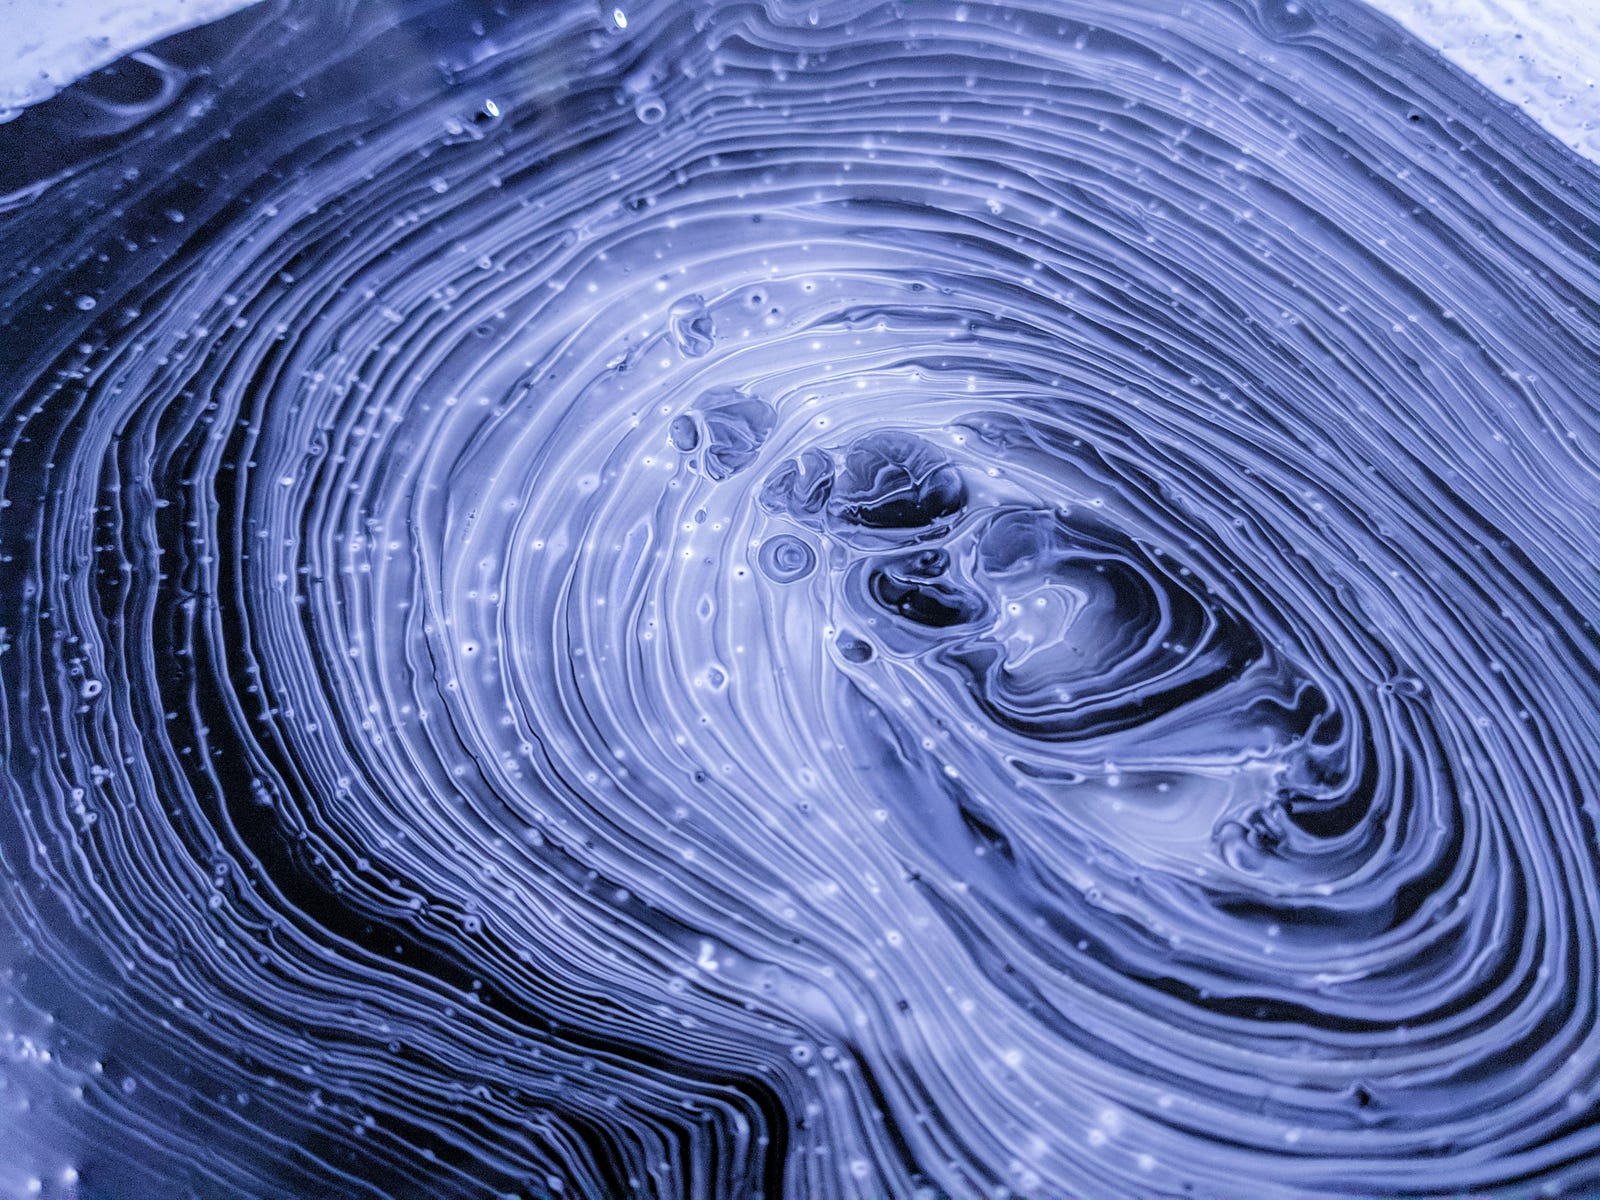 Ab abstract image of a pattern that looks like tree rings, but with white fibers curling in space.